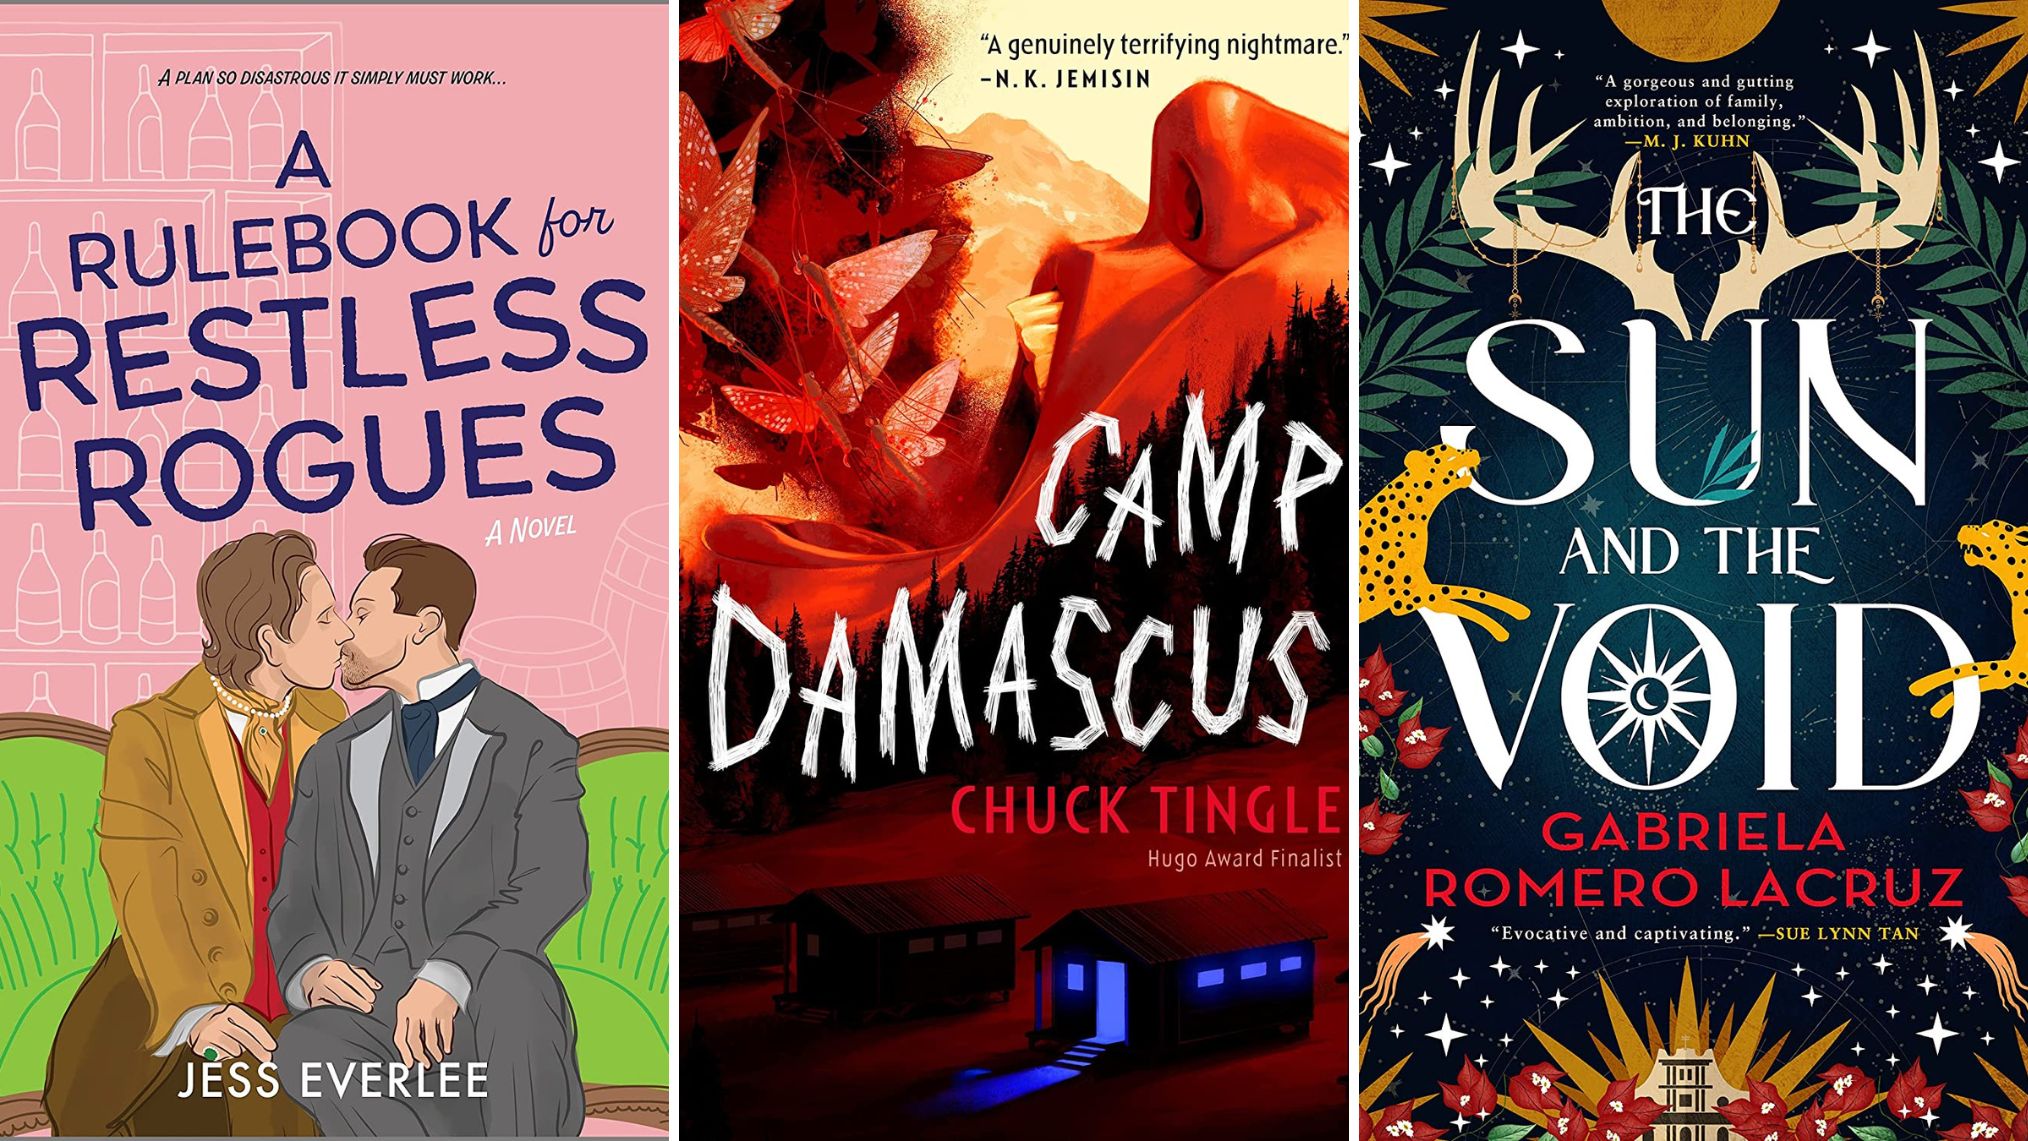 A Rulebook for Restless Rogues by Jess Everlee; Camp Damascus by Chuck Tingle; The Sun and the Void by Gabriela Romero LaCruz